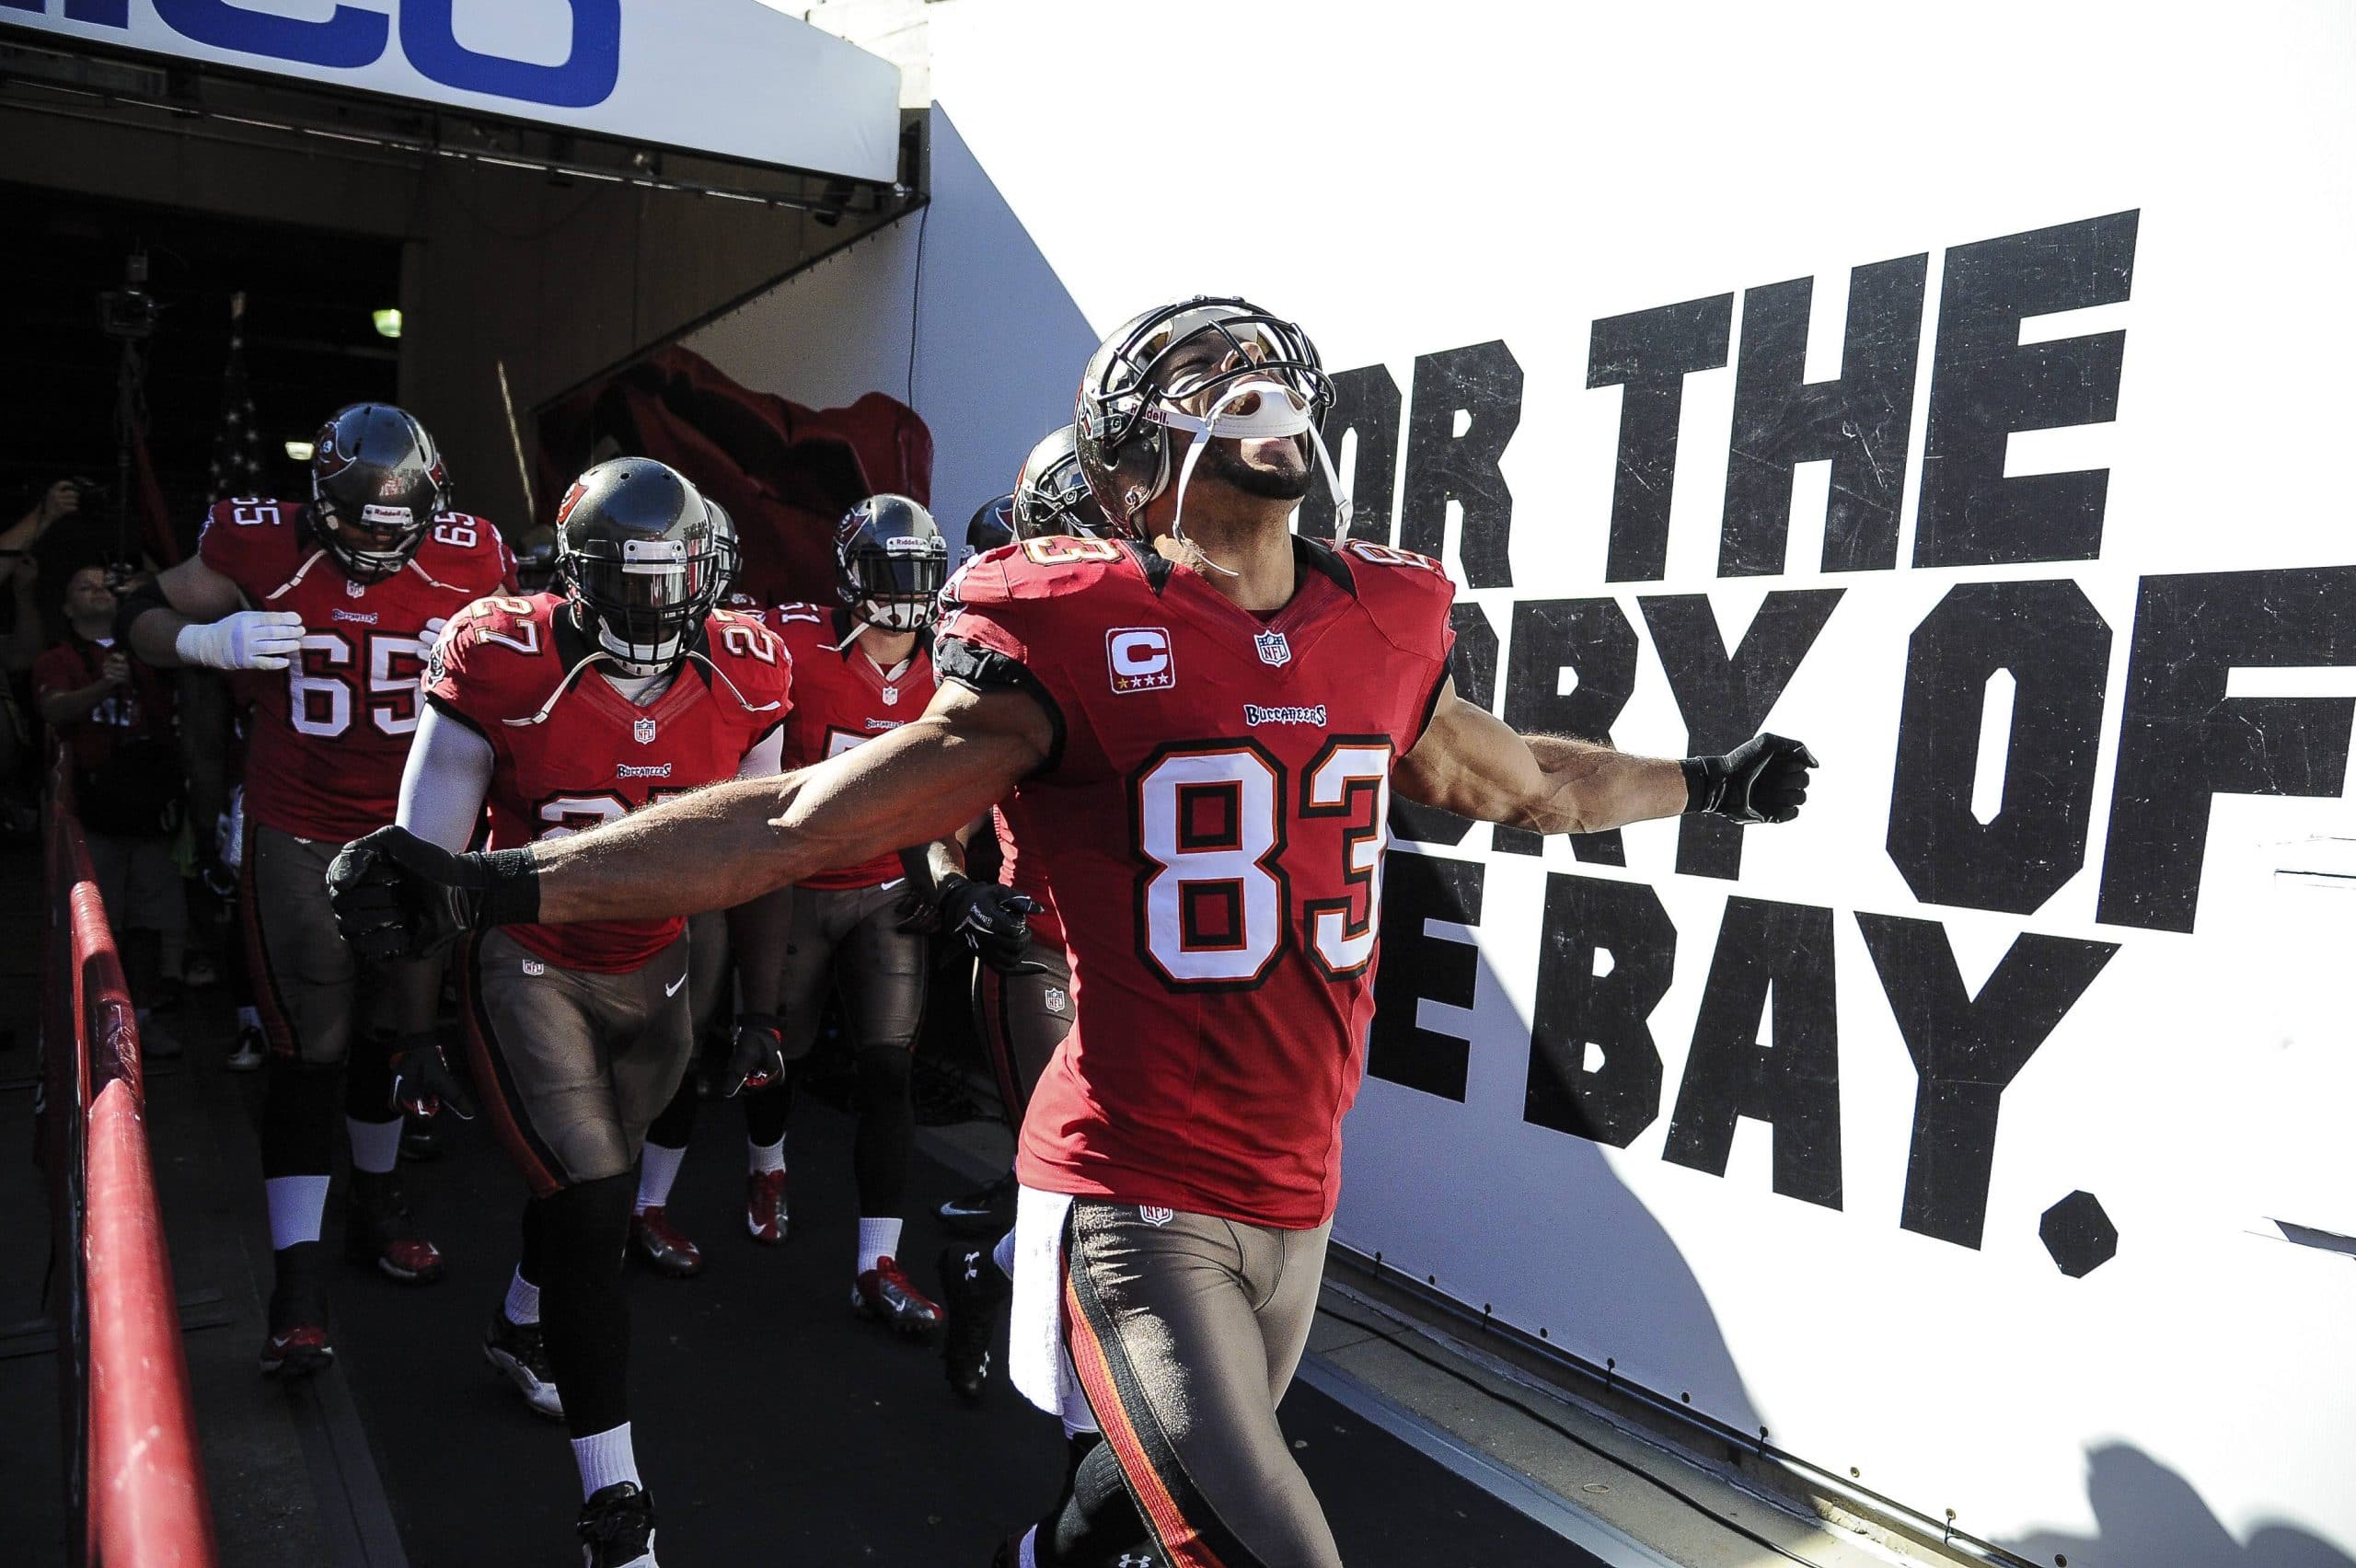 Tampa Bay Buccaneers wide receiver Vincent Jackson (83) basks in the glory of the Bay as he takes the field during week 12 of the 2012 NFL American Football Herren USA season in a game between the Tampa Bay Buccaneers and the Atlanta Falcons.